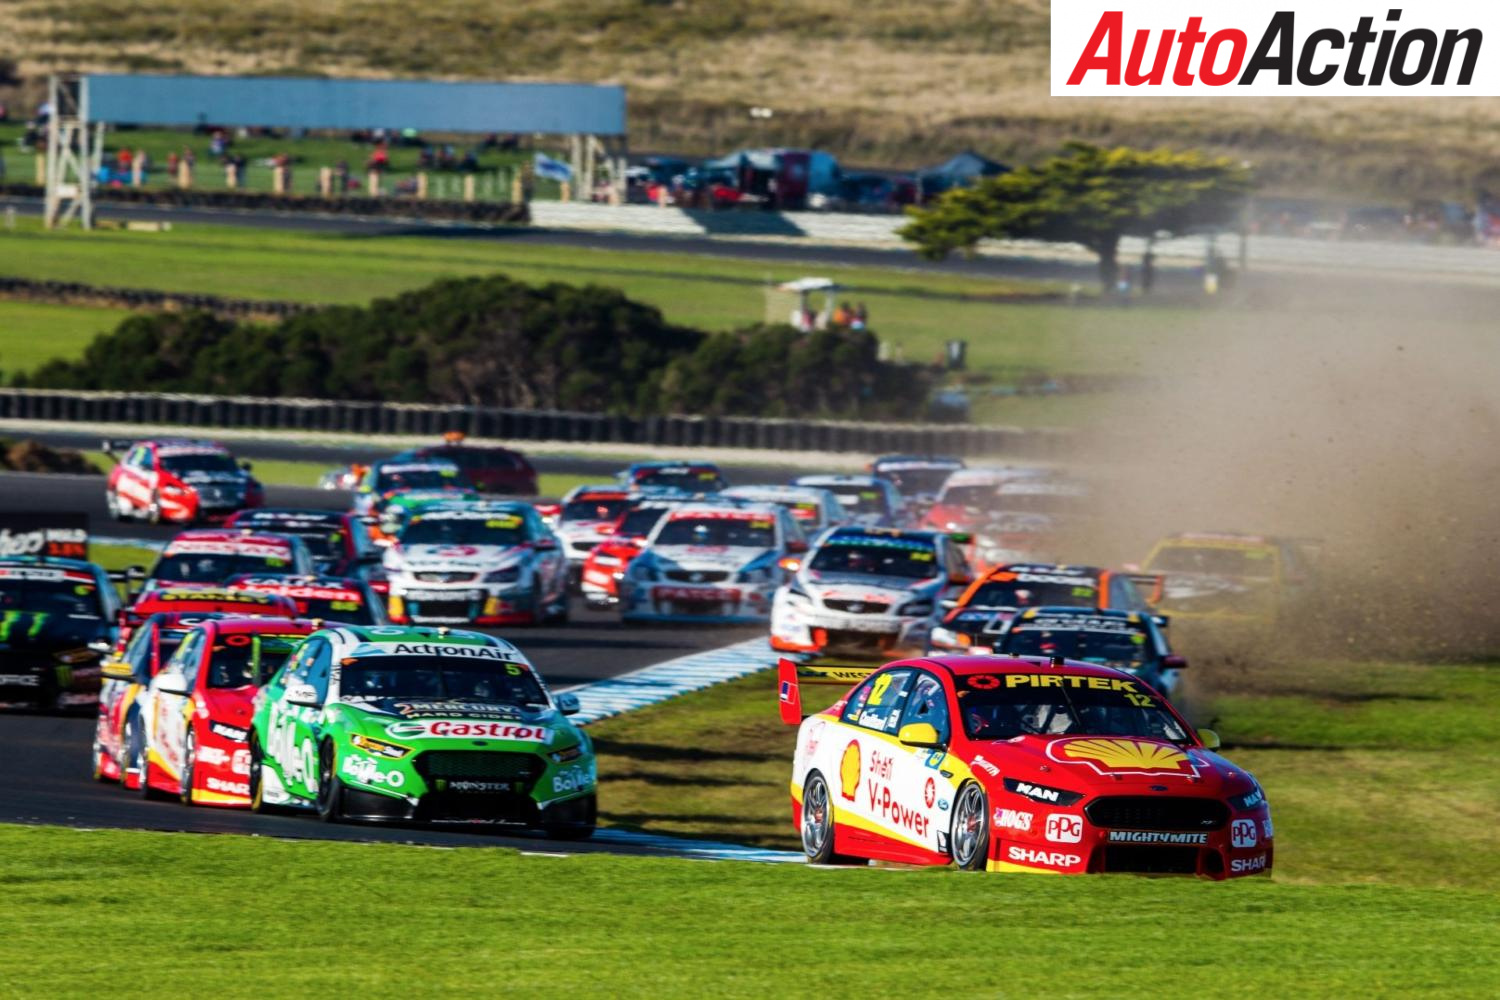 Fabian Coulthard leading a chaotic race at Phillip Island - Photo: Dirk Klynsmith